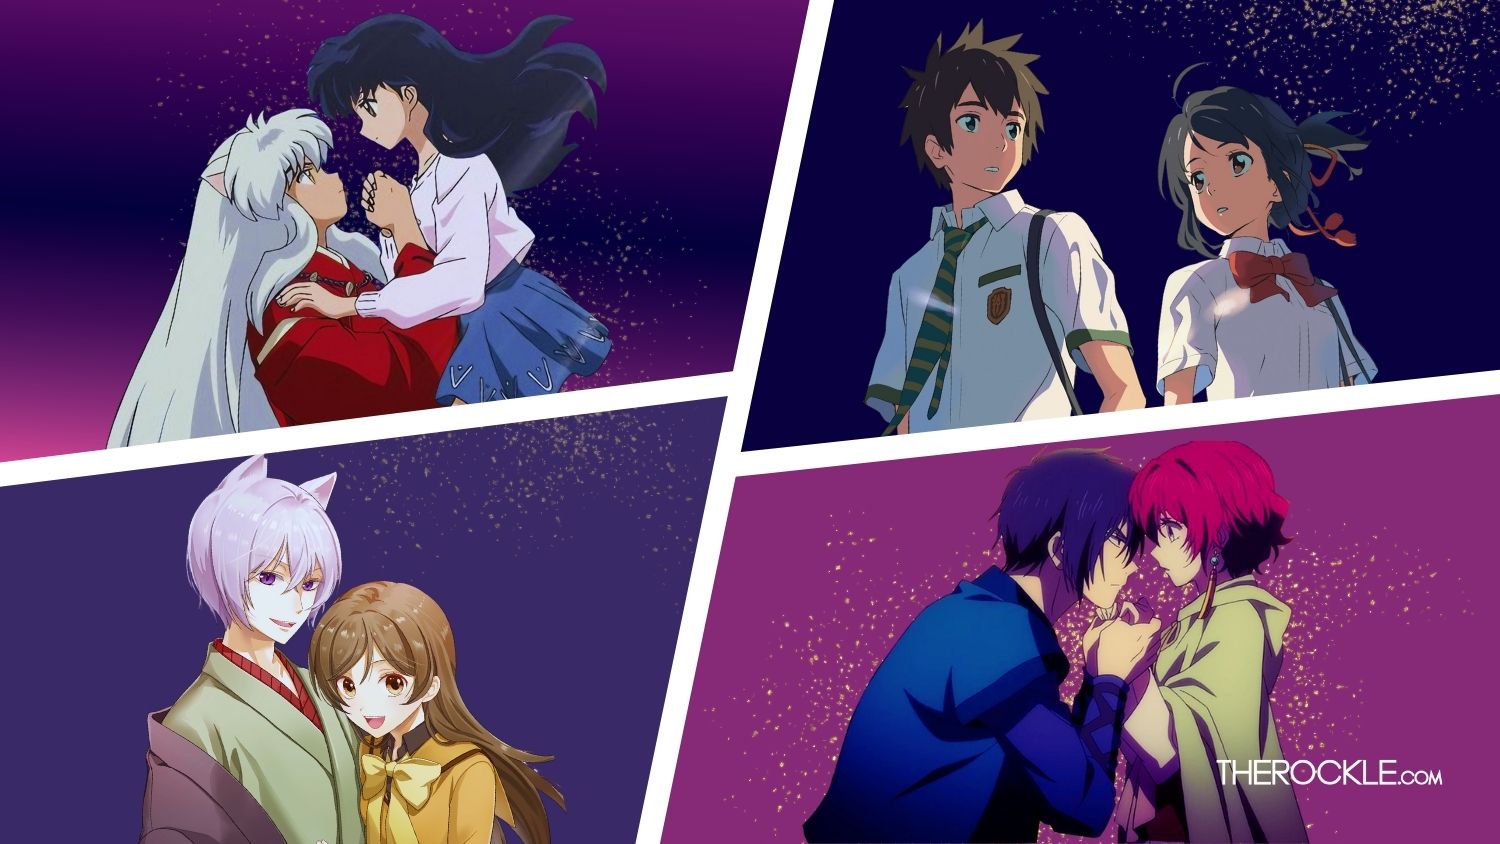 A collage of couples from fantasy romance anime